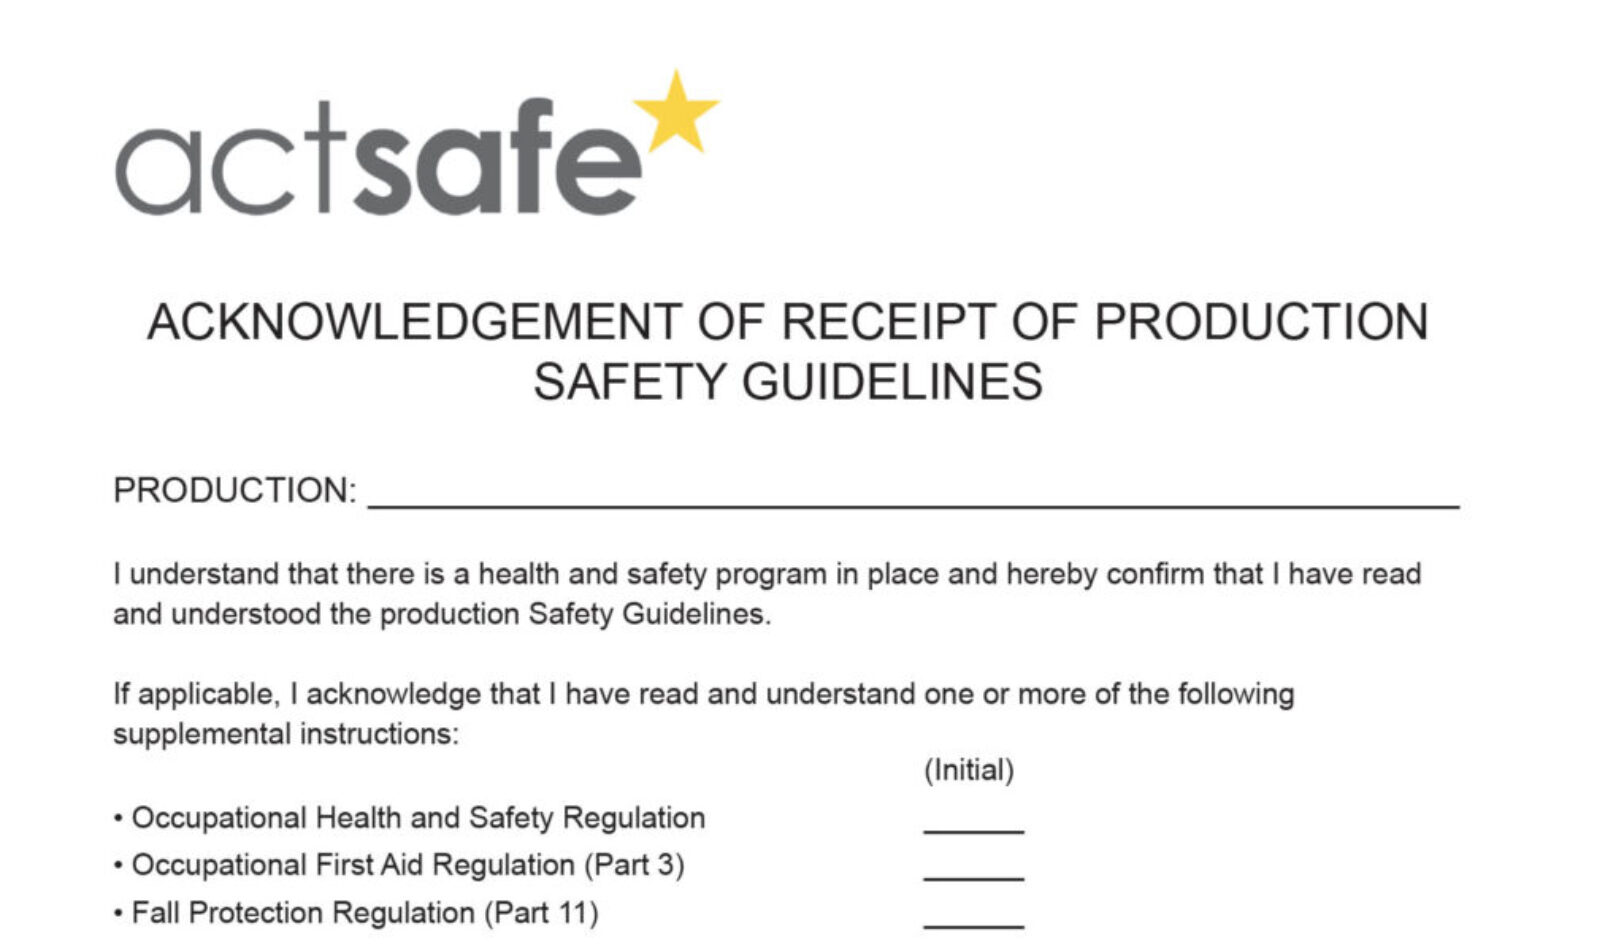 Acknowledgement of Receipt of Production Safety Guidelines Checklist